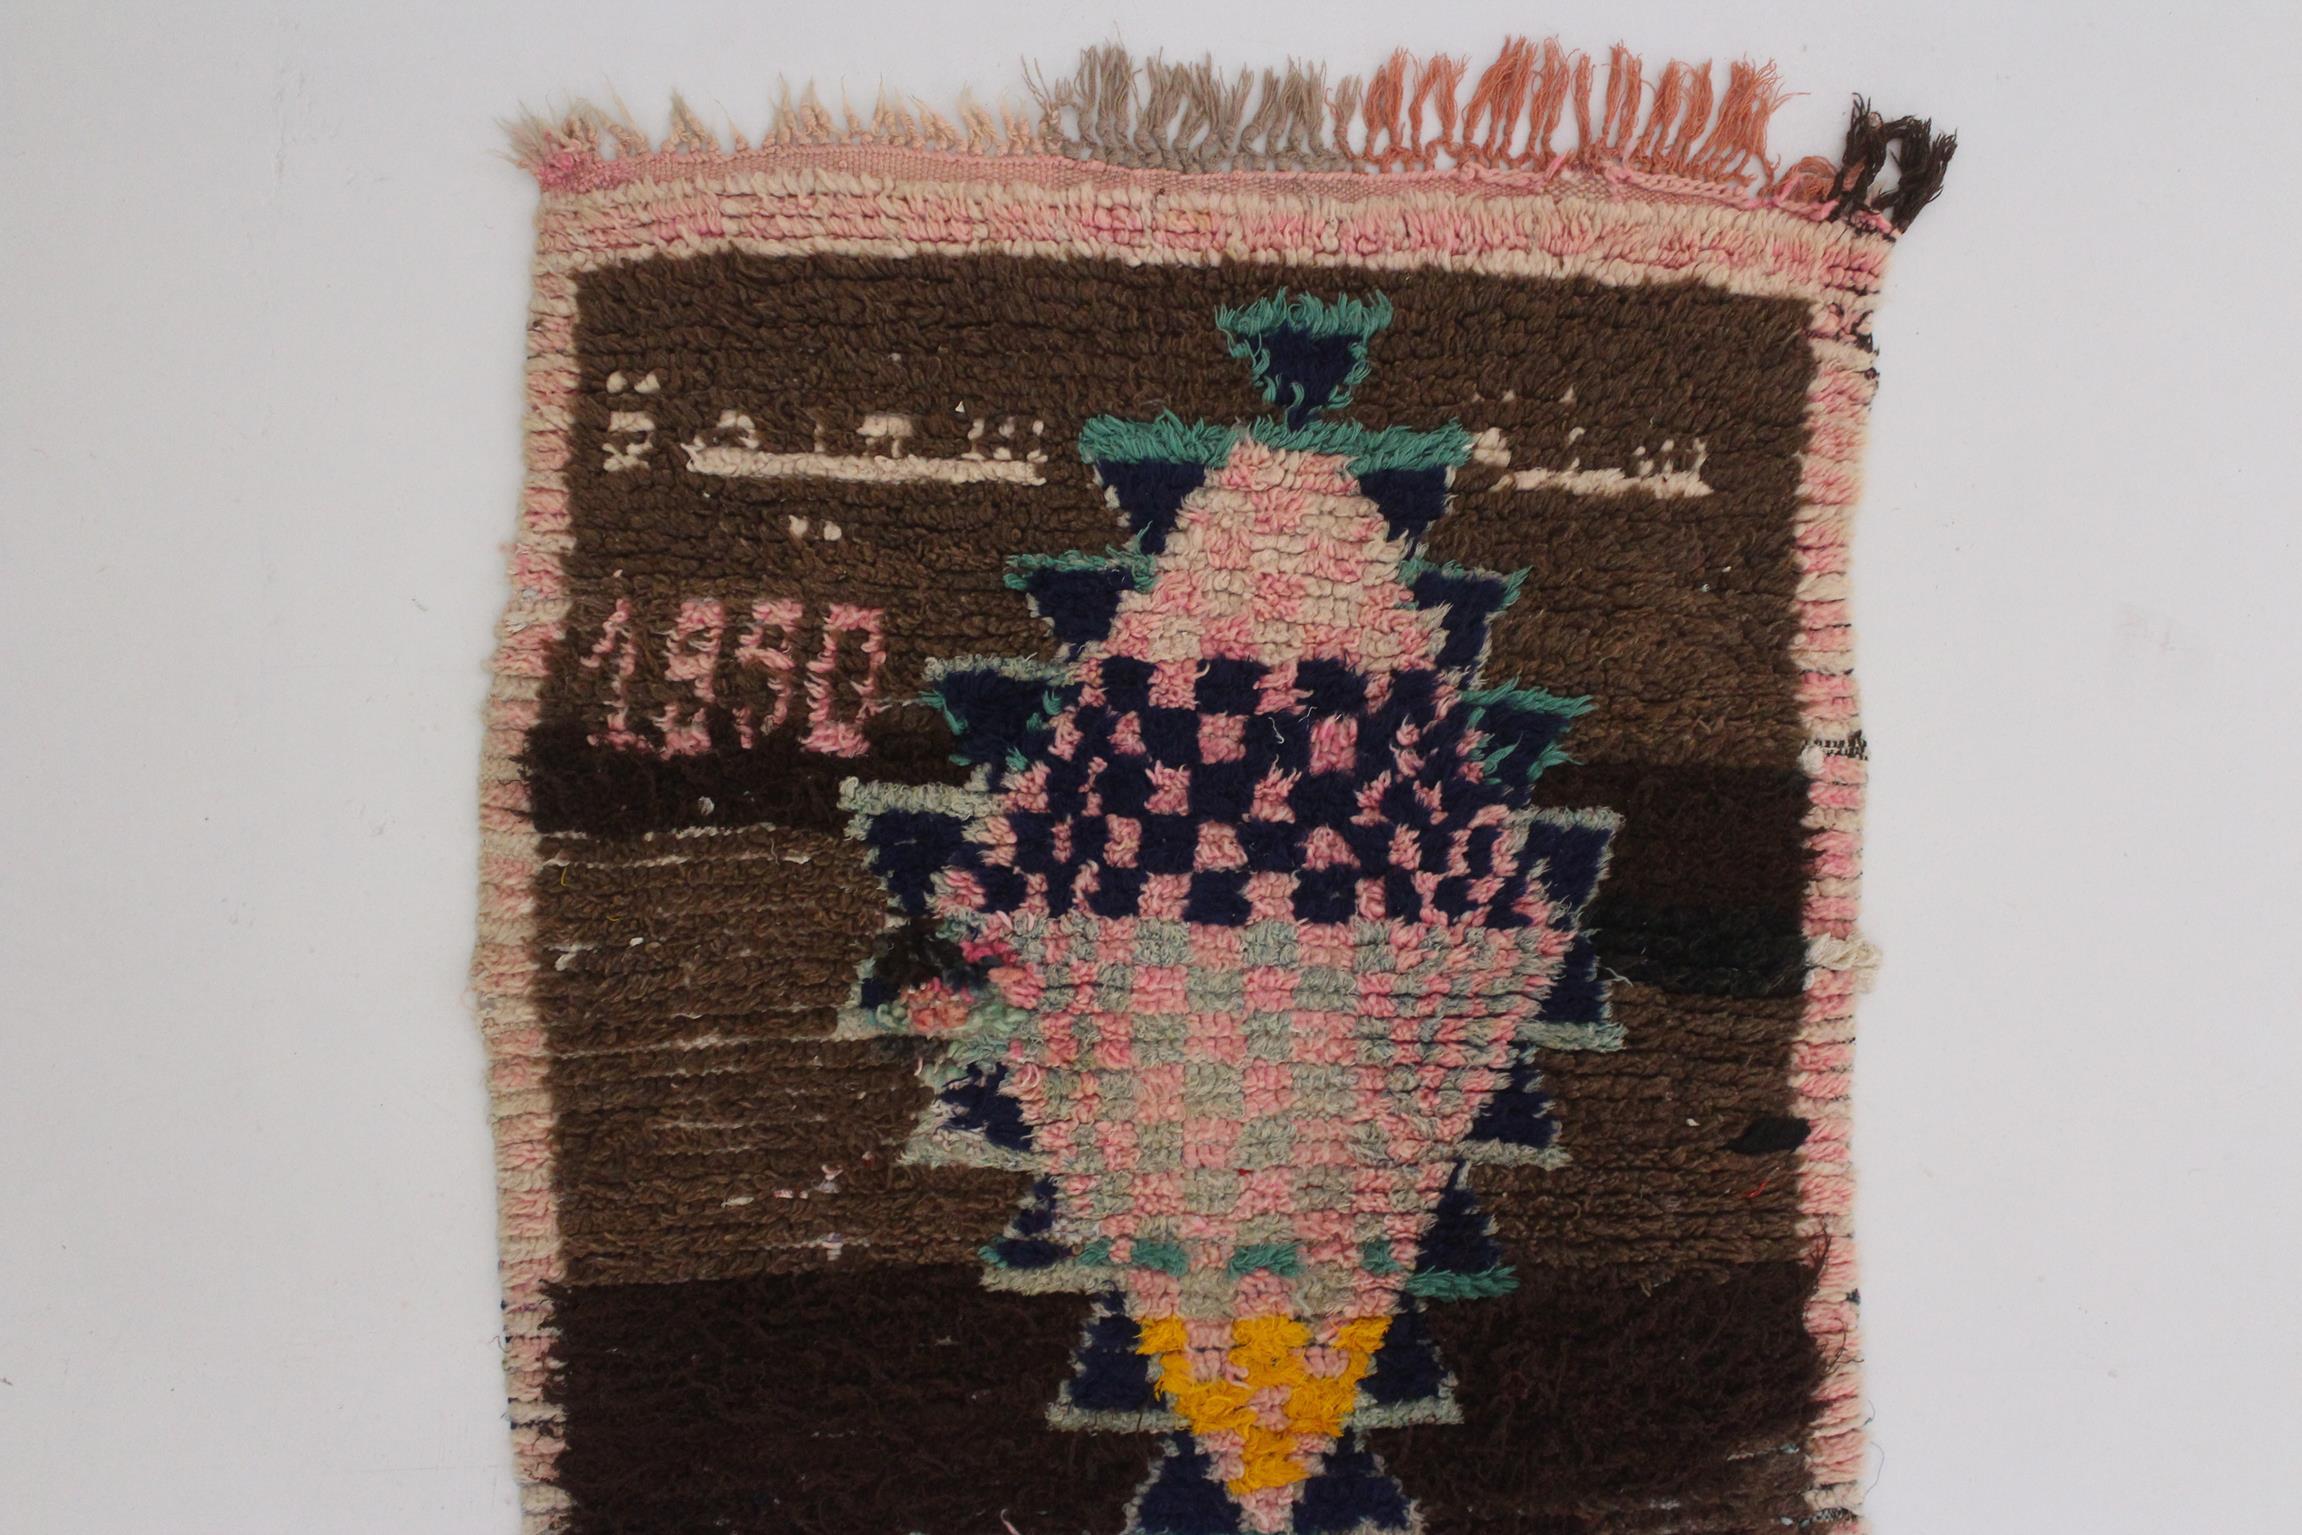 20th Century 1990 vintage Moroccan Azilal runner rug - Brown/pink - 3x8.7feet / 93x265cm For Sale